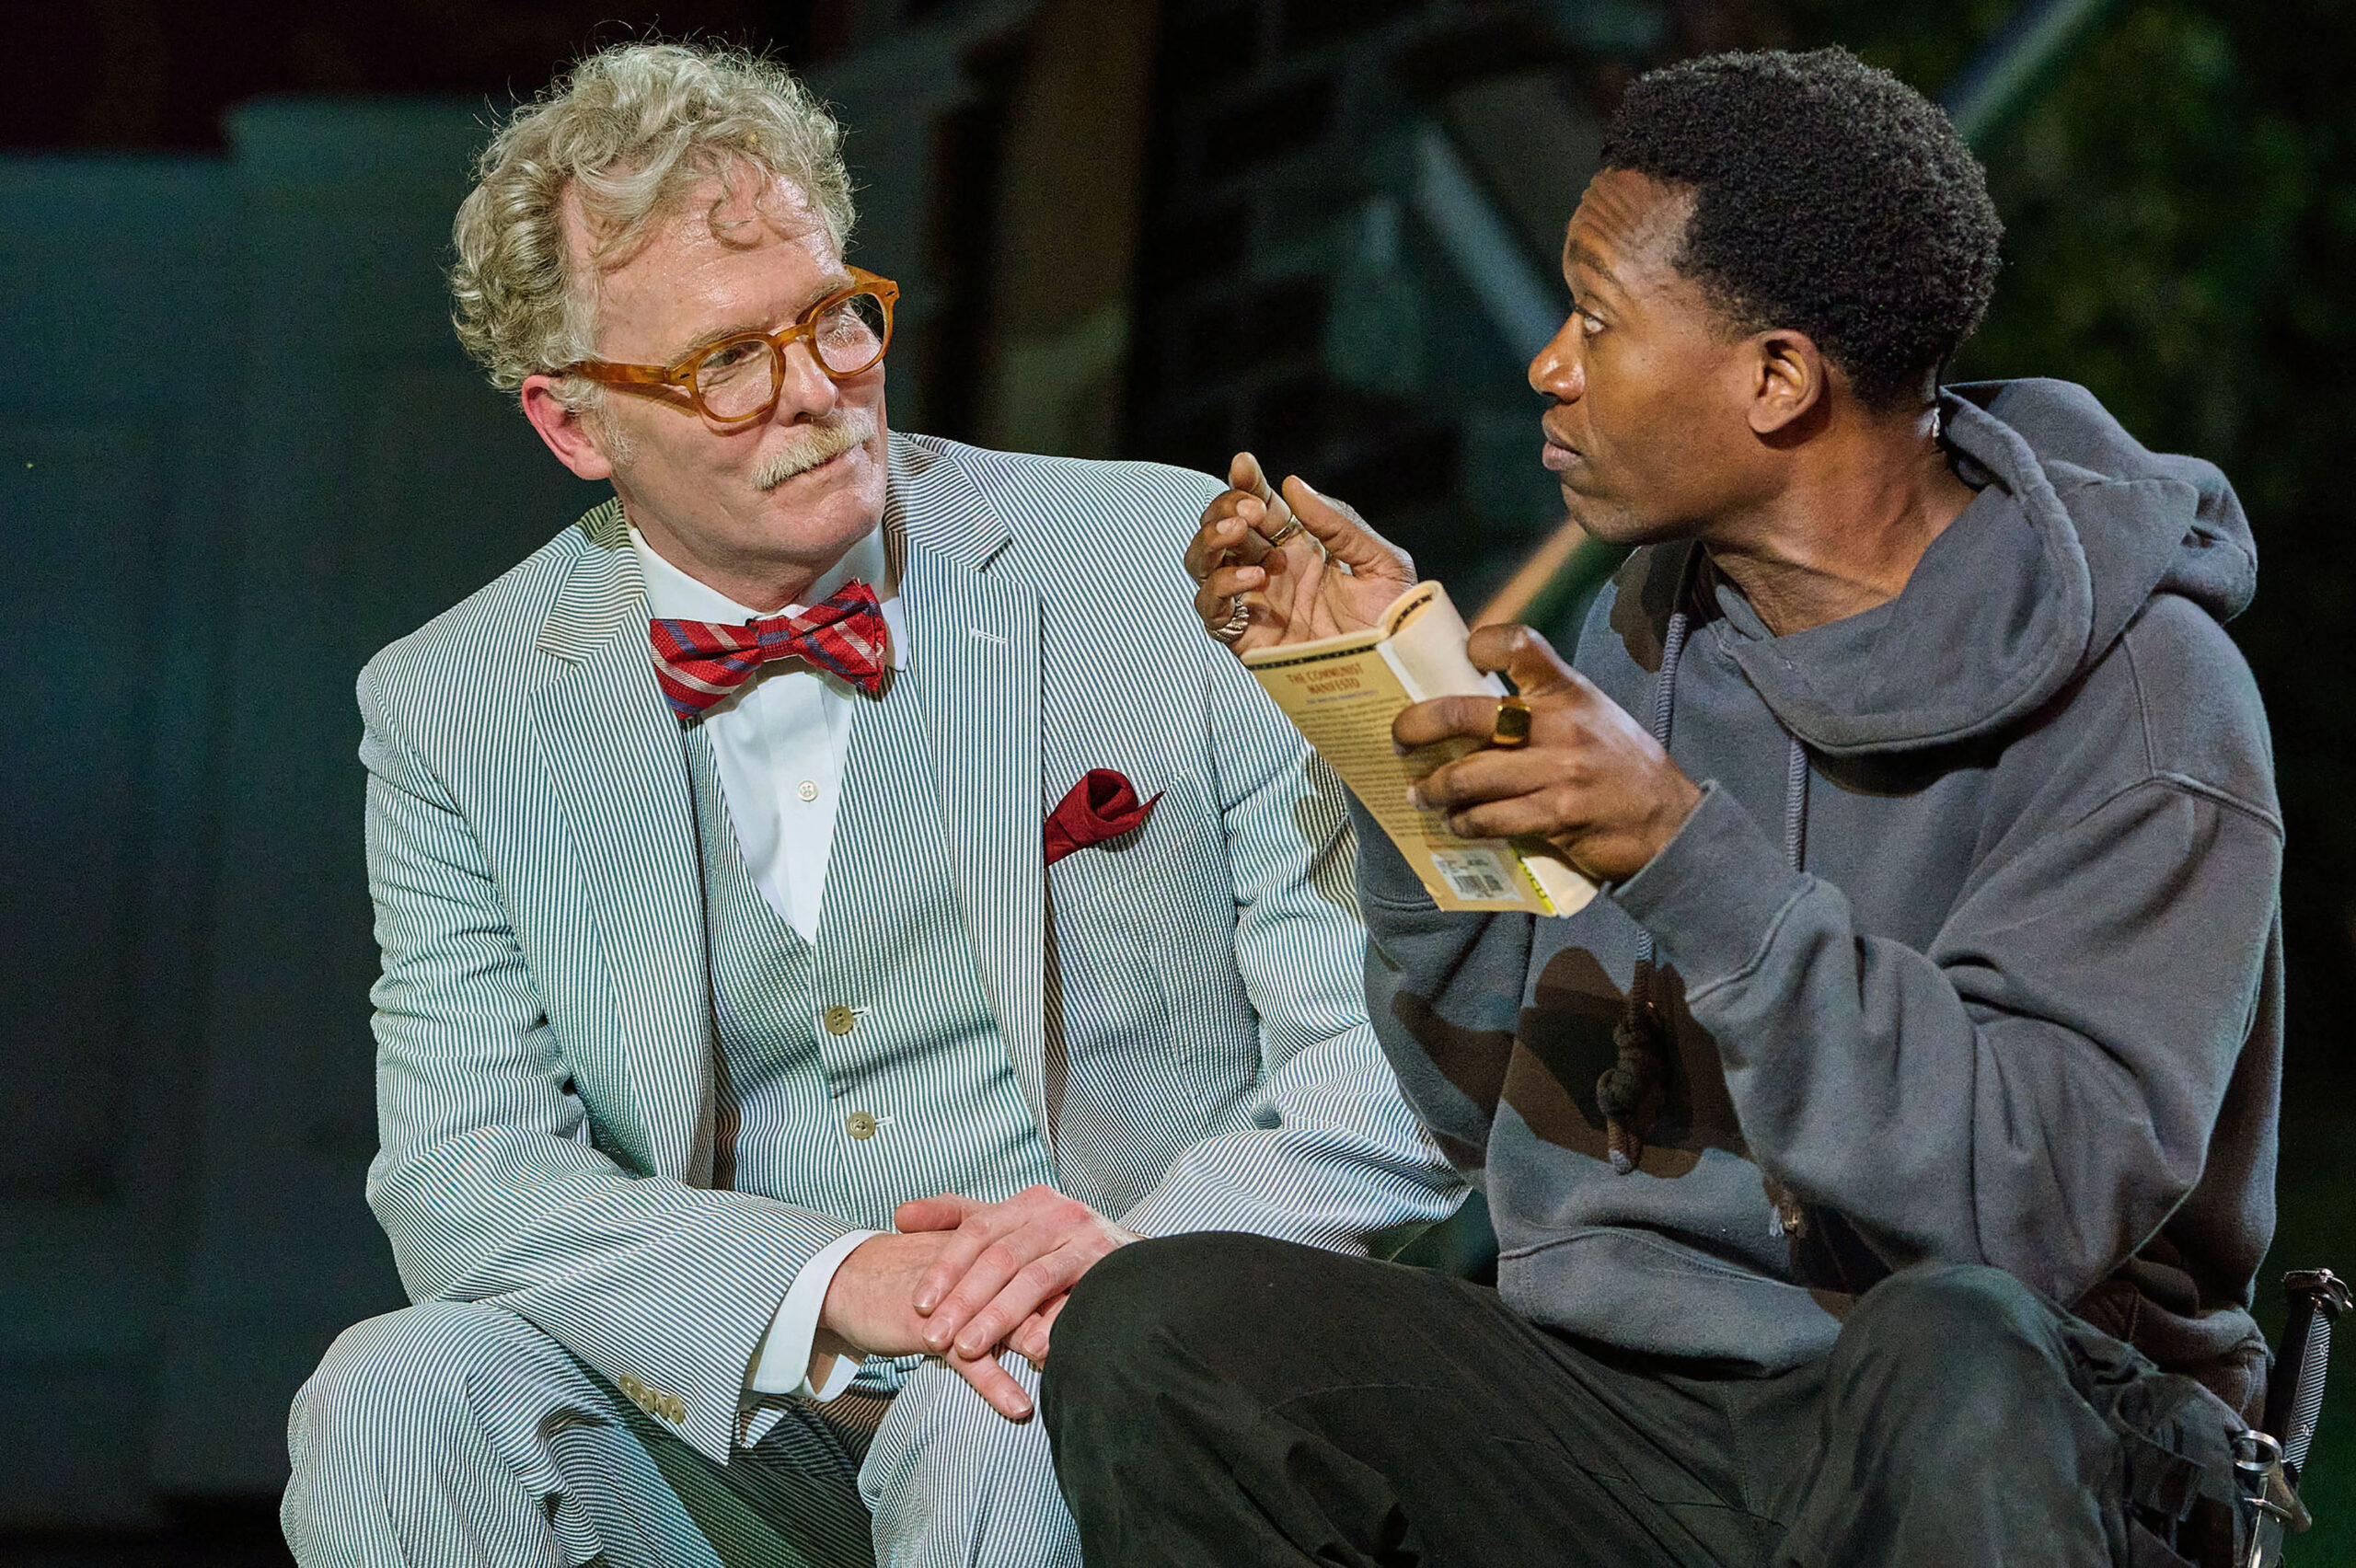 Am older white man with gray hair in a gray 3-piece suite with a red bow tie sits next to a young Black man wearing a gray hoodie sweatshirt holding a paper back book.